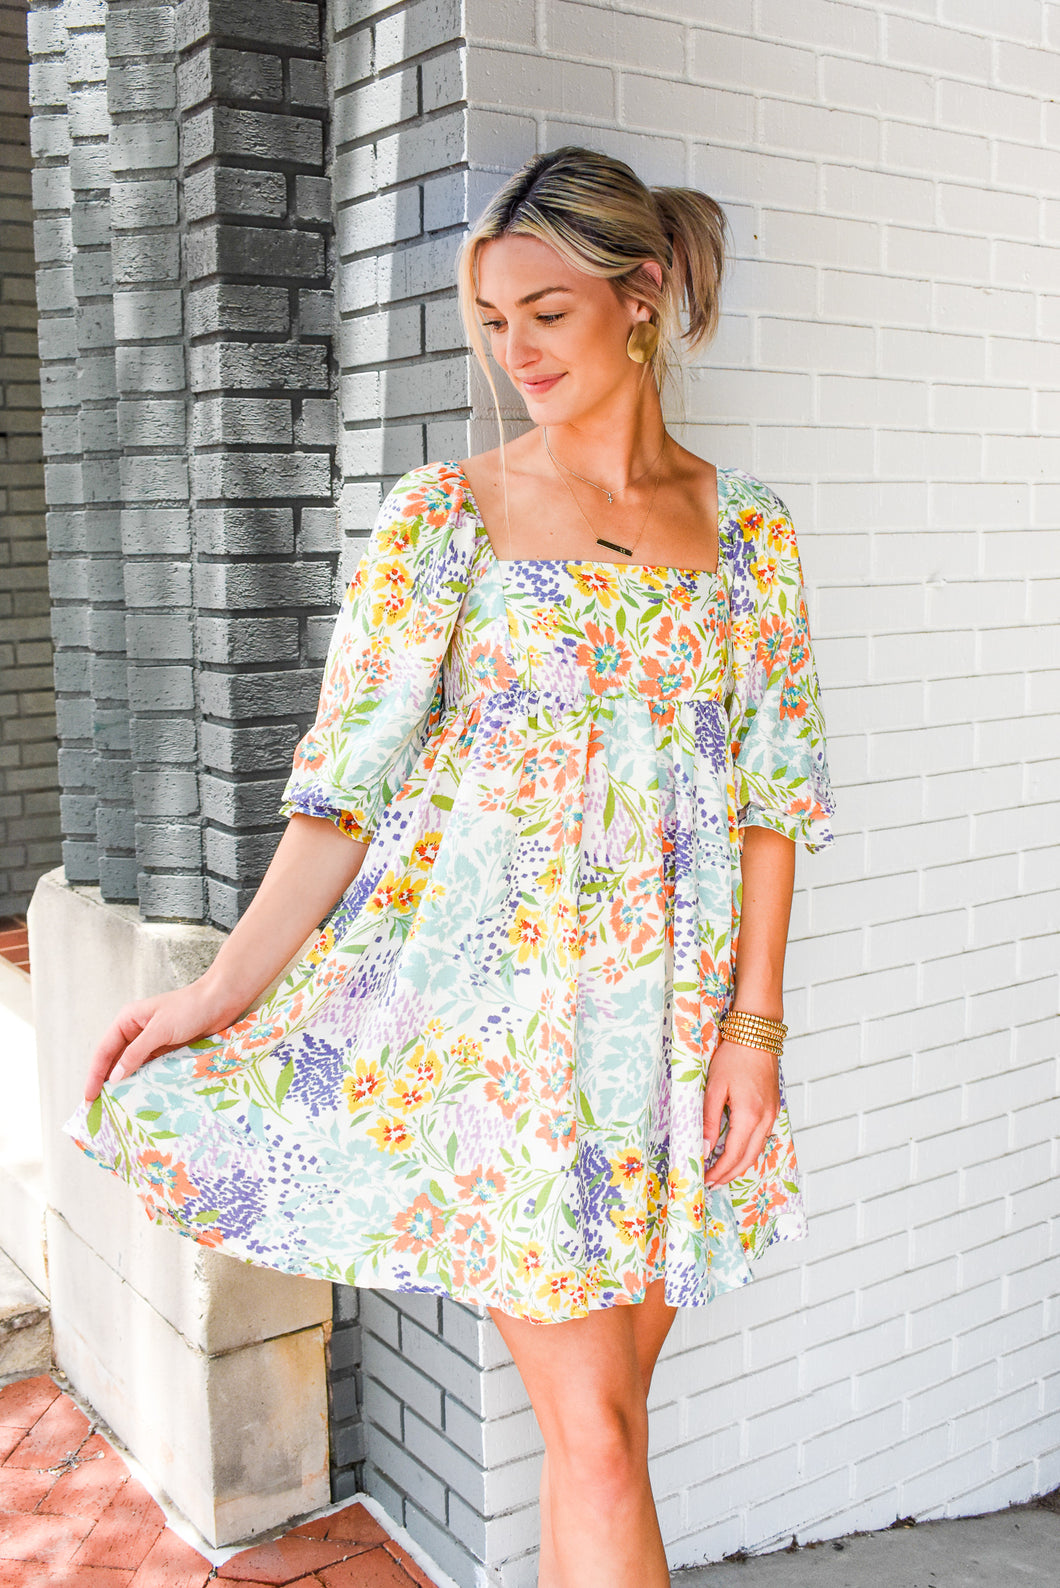 Stuck With It Floral Print Dress